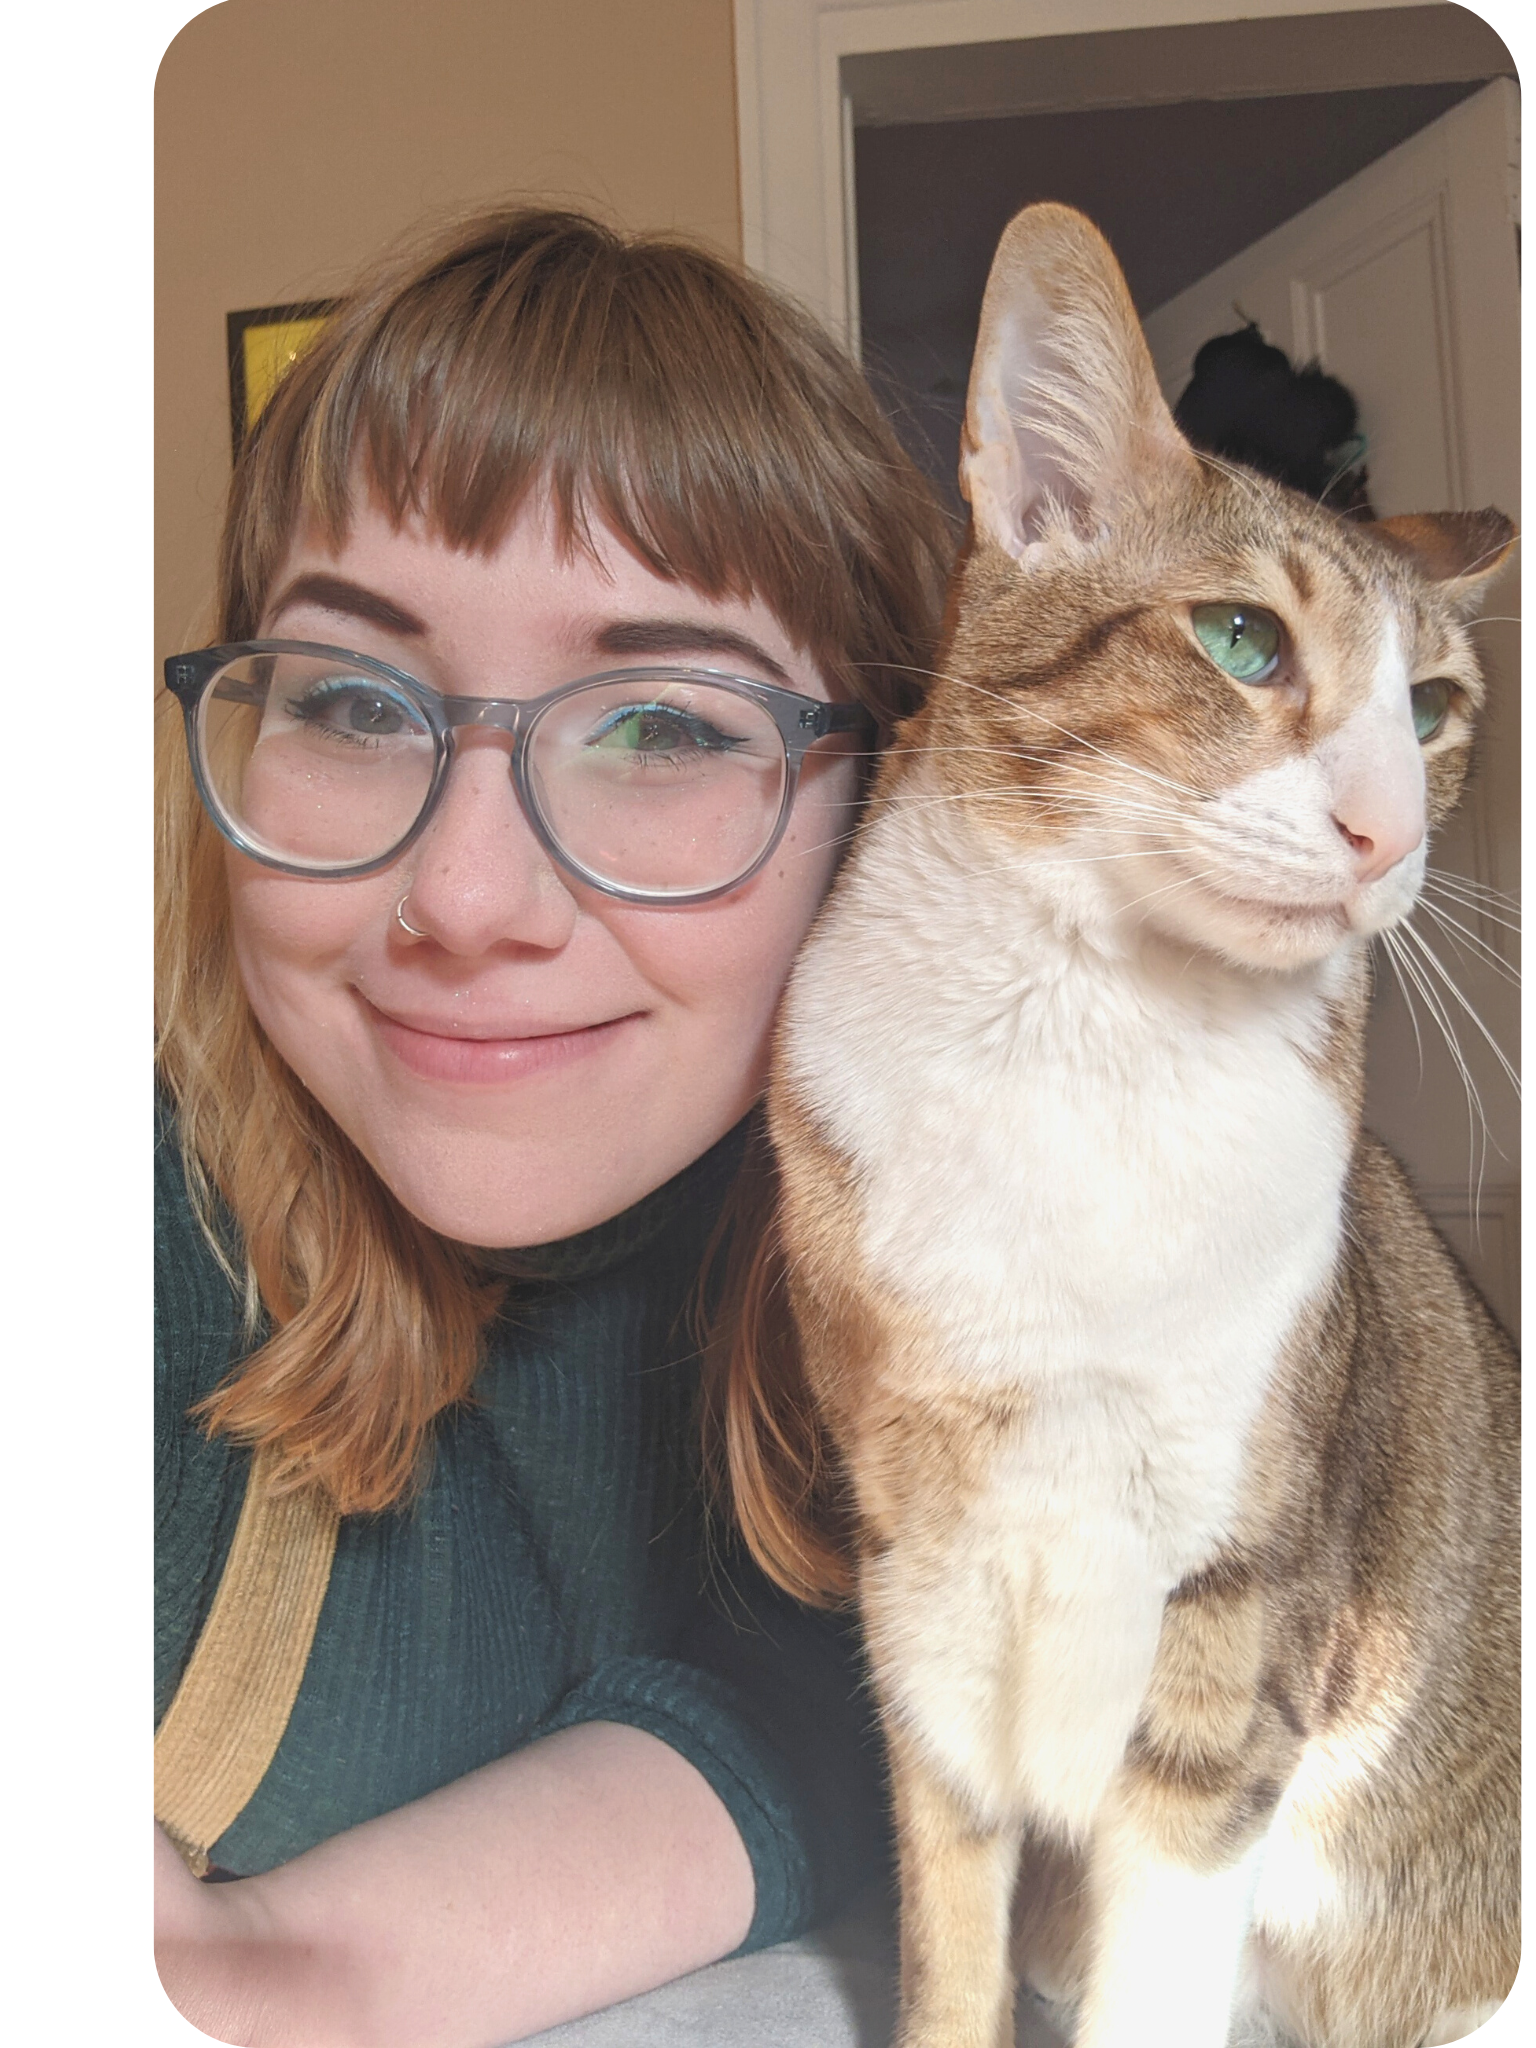 photograph of the artist, Mikayla, and her cat, Snickers